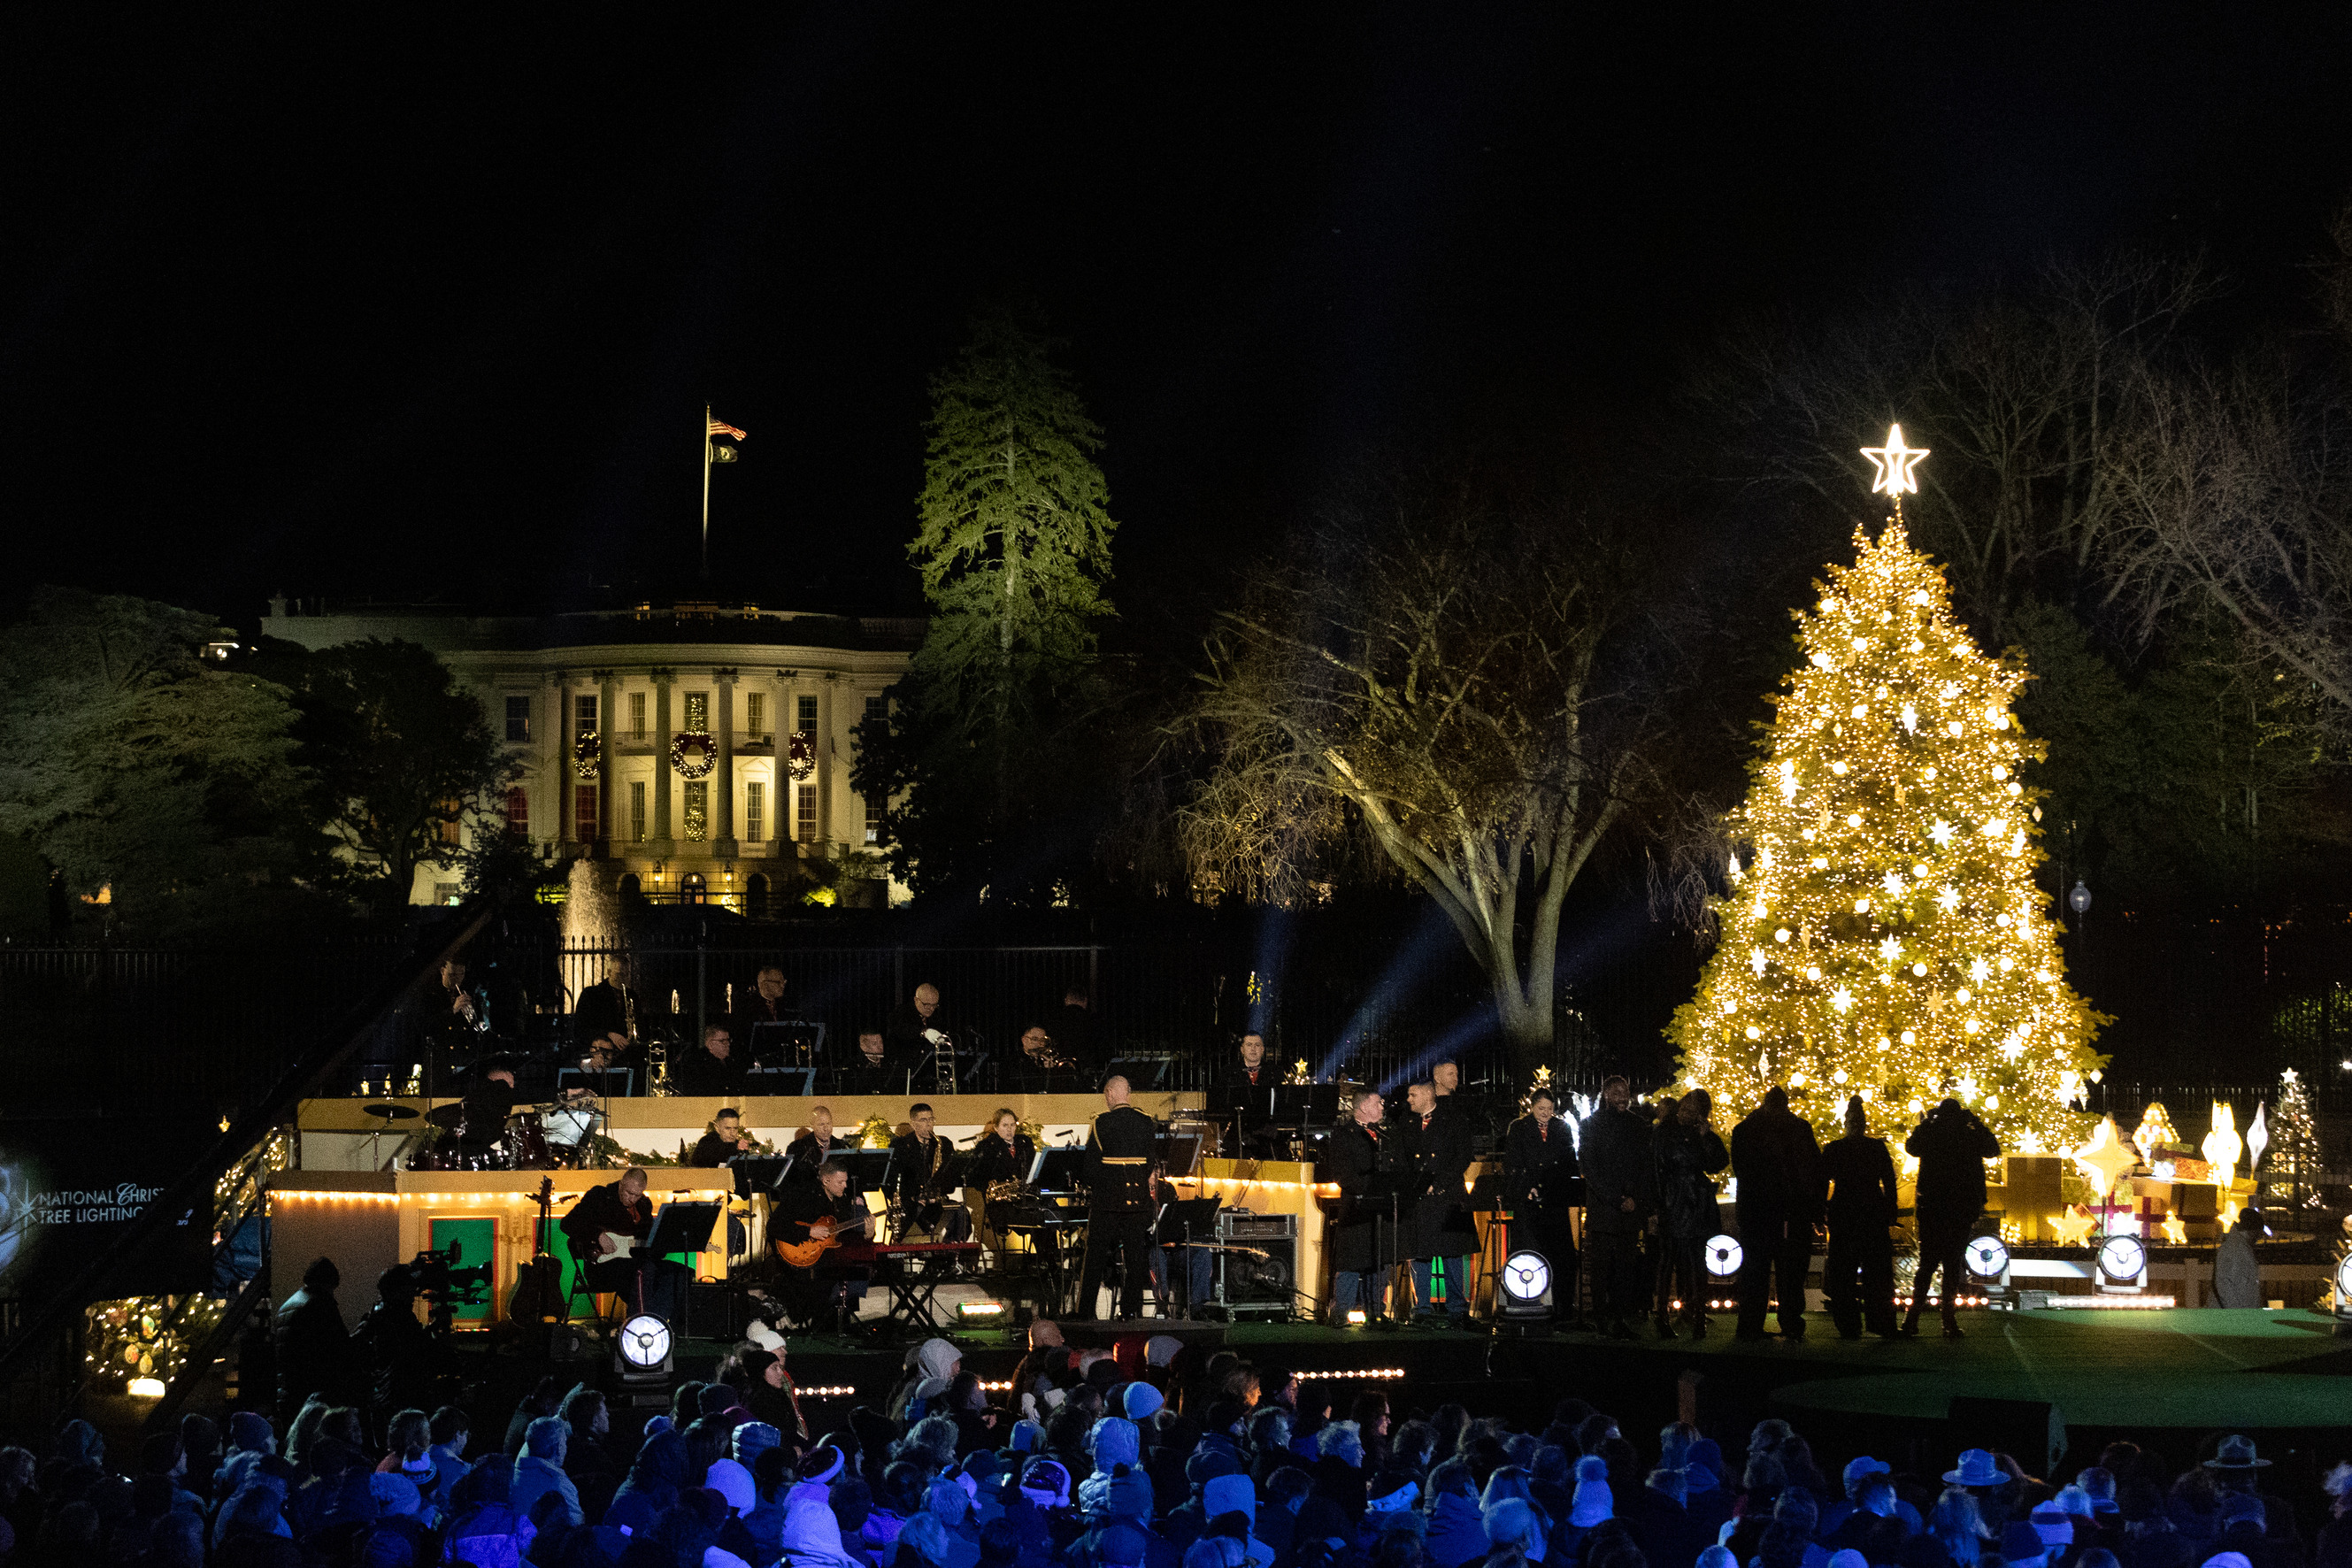 A band prepares to play in front of the White House and a large lit Christmas tree at night.